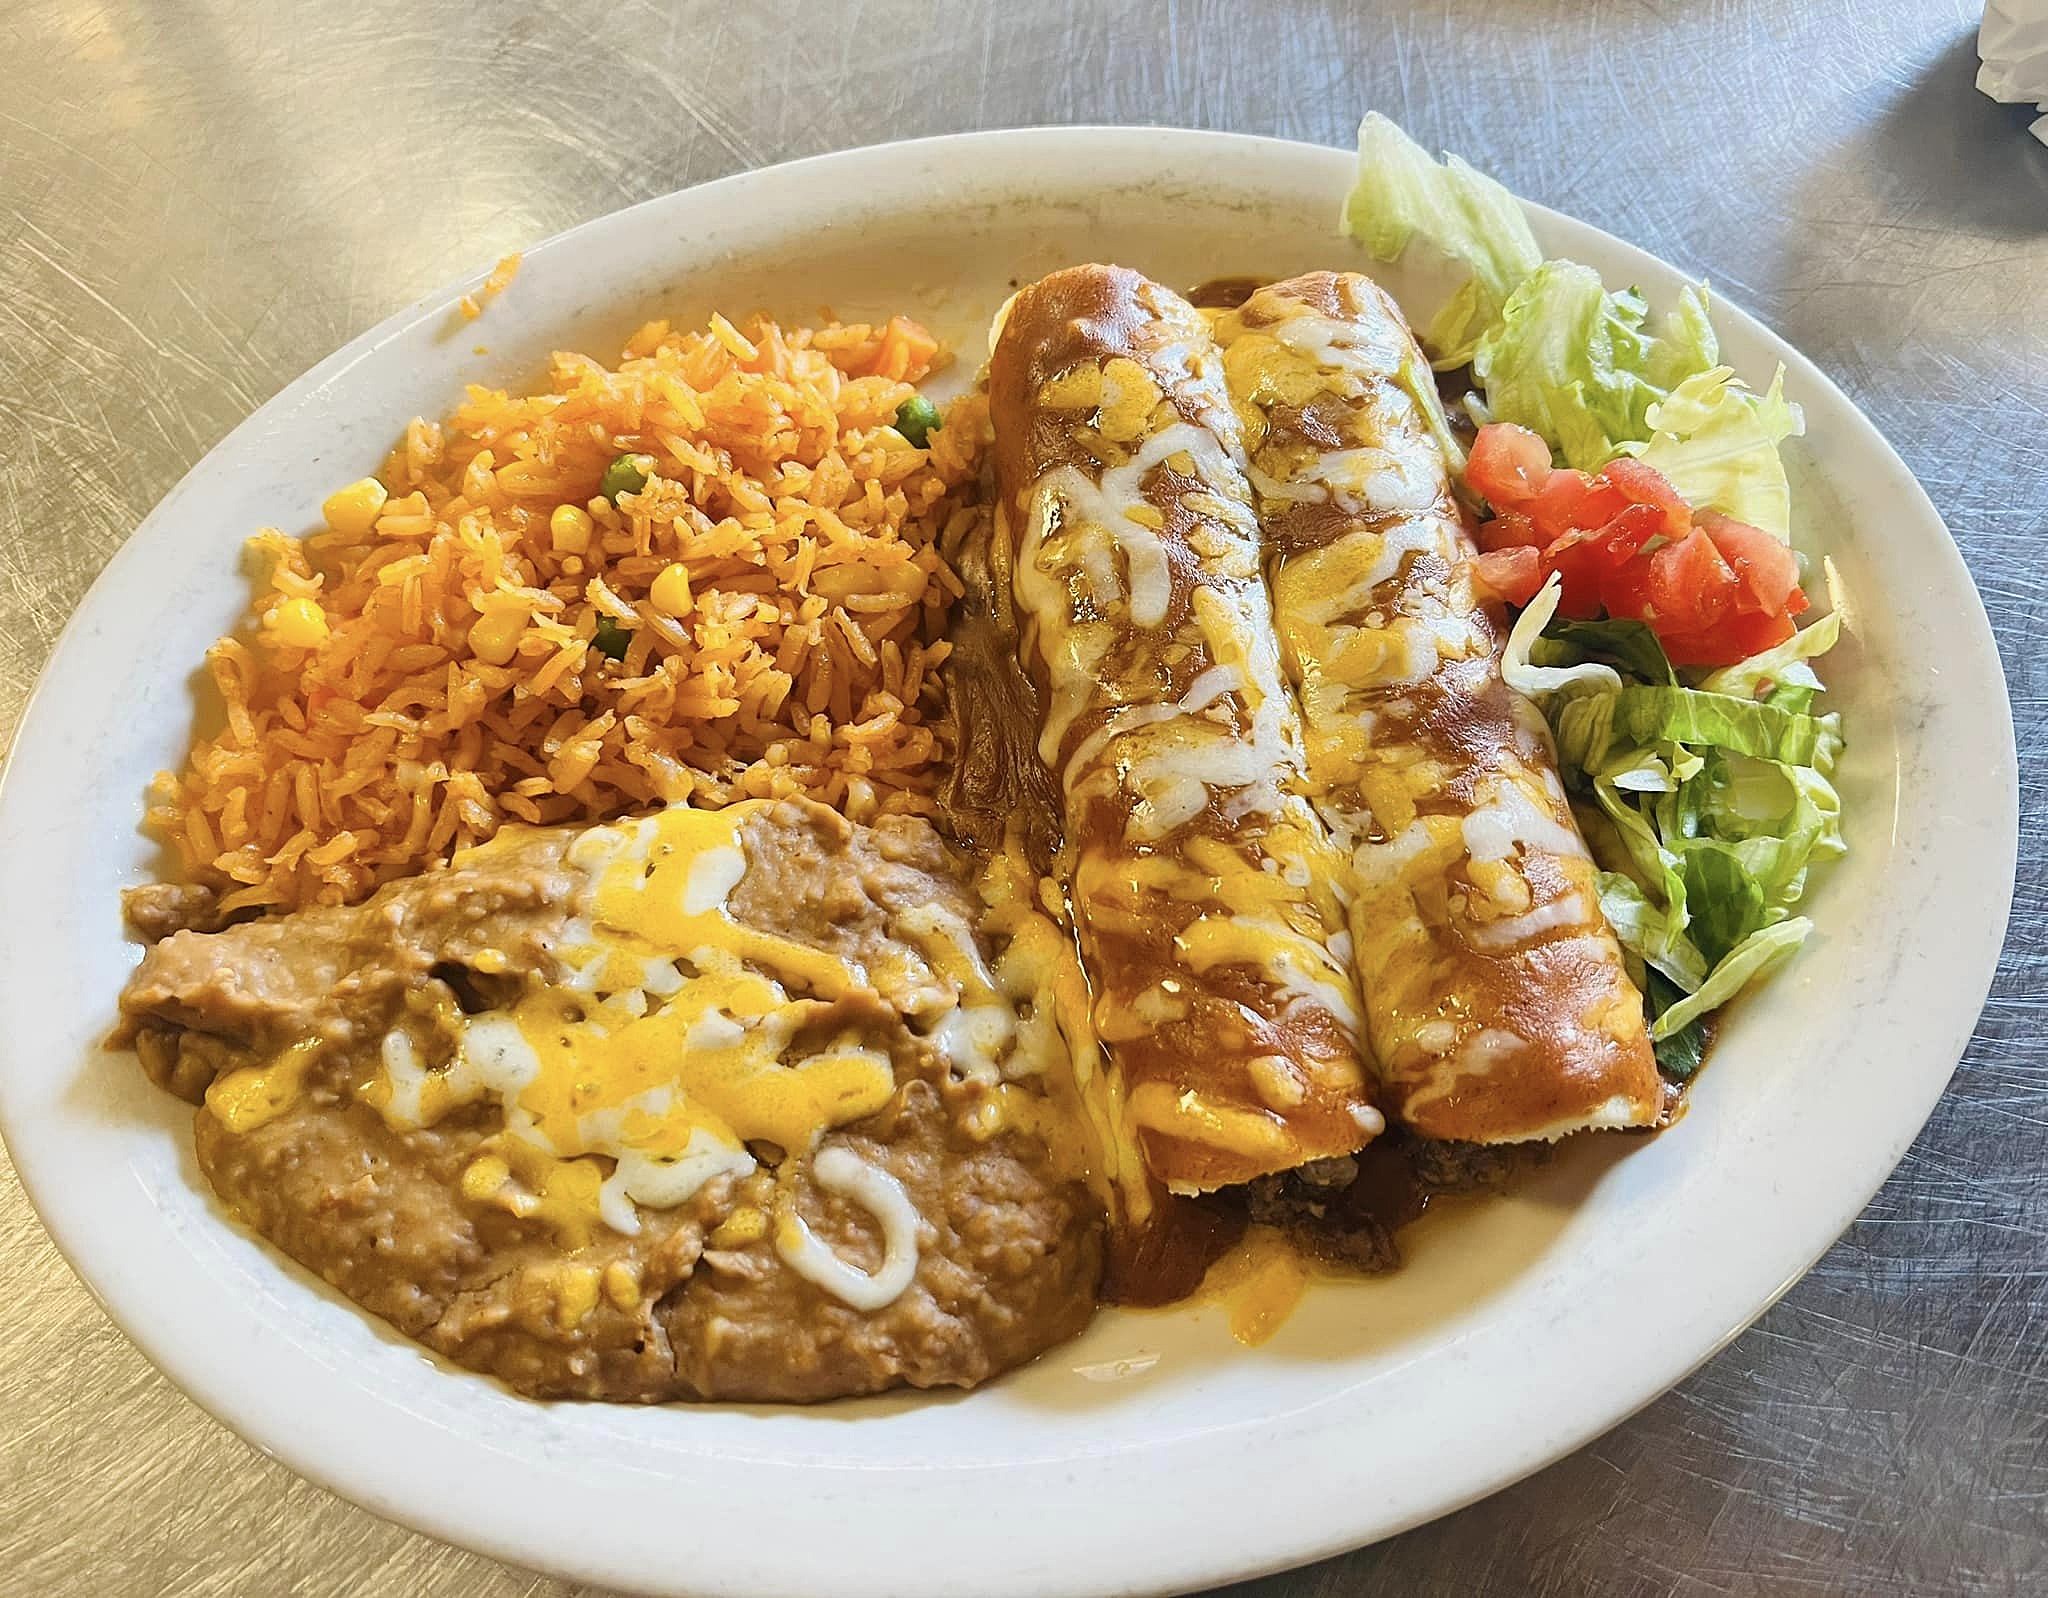 Caza Brava Mexican restaurant opens in Powell